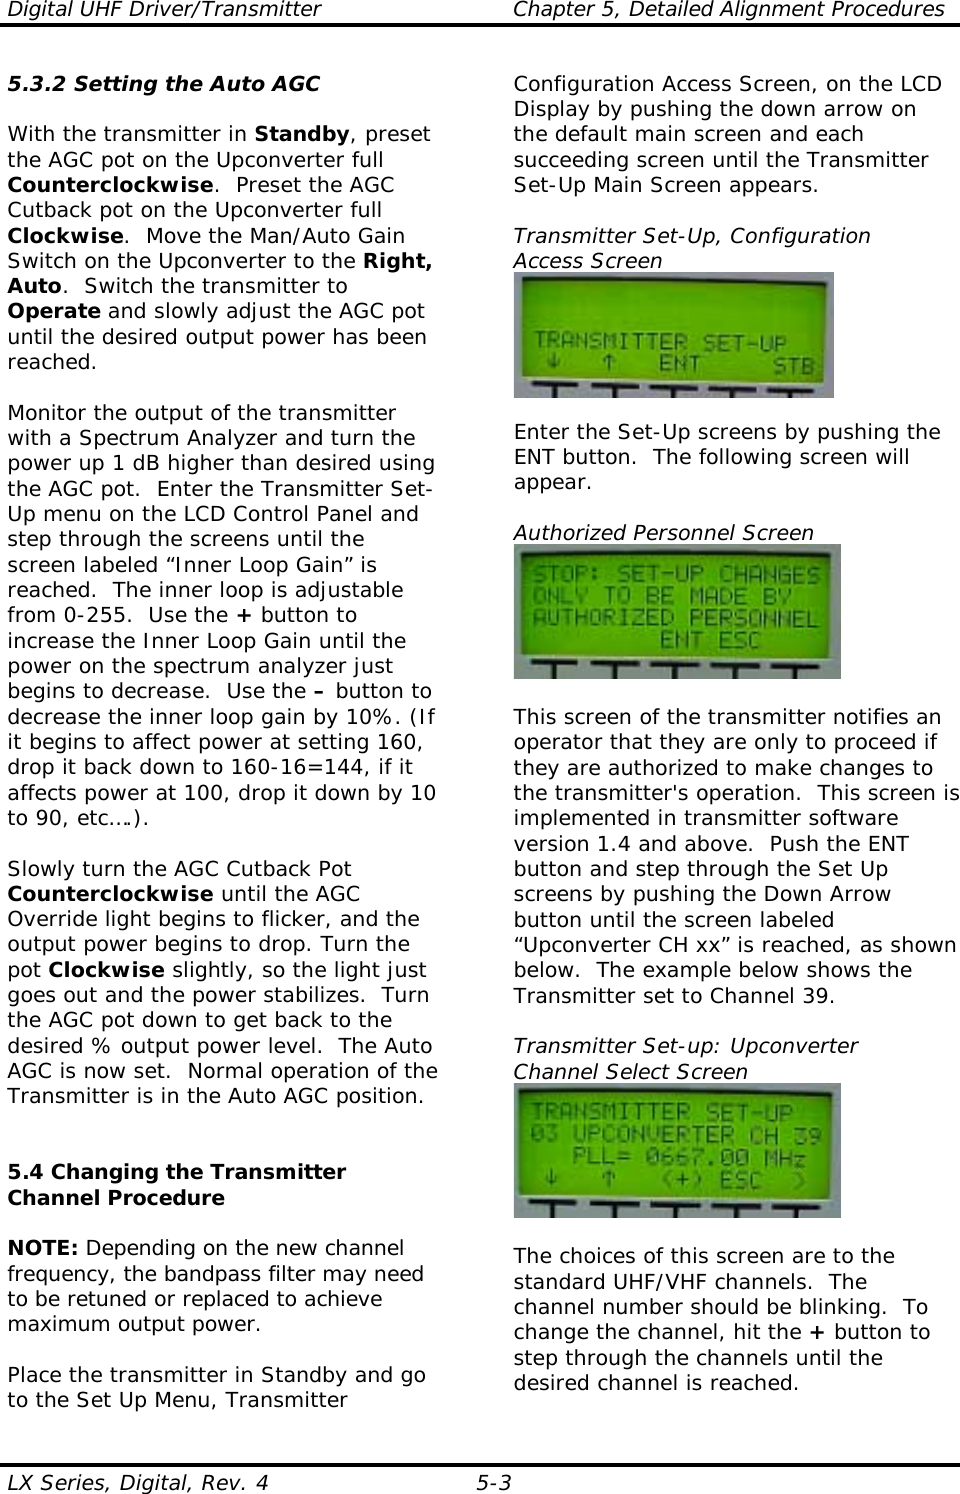 Digital UHF Driver/Transmitter  Chapter 5, Detailed Alignment Procedures  LX Series, Digital, Rev. 4  5-3 5.3.2 Setting the Auto AGC  With the transmitter in Standby, preset the AGC pot on the Upconverter full Counterclockwise.  Preset the AGC Cutback pot on the Upconverter full Clockwise.  Move the Man/Auto Gain Switch on the Upconverter to the Right, Auto.  Switch the transmitter to Operate and slowly adjust the AGC pot until the desired output power has been reached.   Monitor the output of the transmitter with a Spectrum Analyzer and turn the power up 1 dB higher than desired using the AGC pot.  Enter the Transmitter Set-Up menu on the LCD Control Panel and step through the screens until the screen labeled “Inner Loop Gain” is reached.  The inner loop is adjustable from 0-255.  Use the + button to increase the Inner Loop Gain until the power on the spectrum analyzer just begins to decrease.  Use the – button to decrease the inner loop gain by 10%. (If it begins to affect power at setting 160, drop it back down to 160-16=144, if it affects power at 100, drop it down by 10 to 90, etc….).  Slowly turn the AGC Cutback Pot Counterclockwise until the AGC Override light begins to flicker, and the output power begins to drop. Turn the pot Clockwise slightly, so the light just goes out and the power stabilizes.  Turn the AGC pot down to get back to the desired % output power level.  The Auto AGC is now set.  Normal operation of the Transmitter is in the Auto AGC position.   5.4 Changing the Transmitter Channel Procedure  NOTE: Depending on the new channel frequency, the bandpass filter may need to be retuned or replaced to achieve maximum output power.  Place the transmitter in Standby and go to the Set Up Menu, Transmitter Configuration Access Screen, on the LCD Display by pushing the down arrow on the default main screen and each succeeding screen until the Transmitter Set-Up Main Screen appears.  Transmitter Set-Up, Configuration Access Screen   Enter the Set-Up screens by pushing the ENT button.  The following screen will appear.  Authorized Personnel Screen   This screen of the transmitter notifies an operator that they are only to proceed if they are authorized to make changes to the transmitter&apos;s operation.  This screen is implemented in transmitter software version 1.4 and above.  Push the ENT button and step through the Set Up screens by pushing the Down Arrow button until the screen labeled “Upconverter CH xx” is reached, as shown below.  The example below shows the Transmitter set to Channel 39.  Transmitter Set-up: Upconverter Channel Select Screen   The choices of this screen are to the standard UHF/VHF channels.  The channel number should be blinking.  To change the channel, hit the + button to step through the channels until the desired channel is reached.  